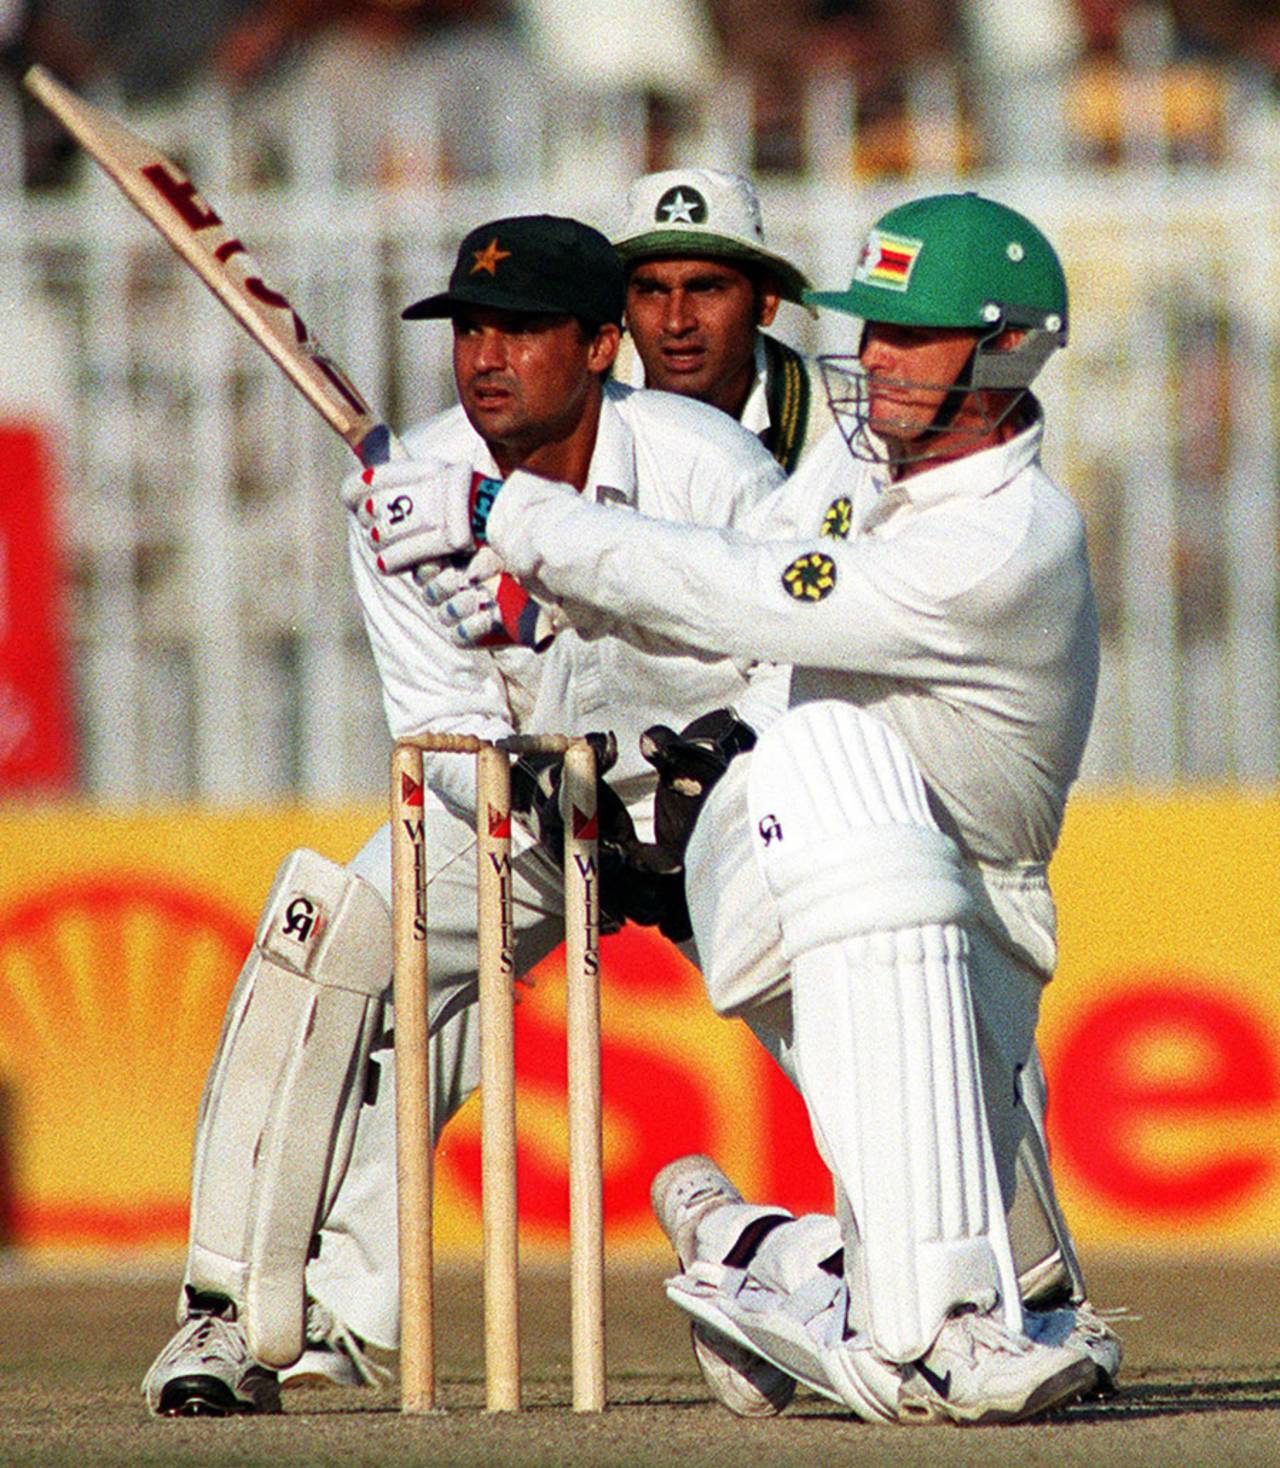 Pakistani skipper Aamir Sohail (C) and wicketkeeper Moin Khan (L) watch a boundary hit by Zimb abwe's Andy Flower in the third and final one-day international Cricket match in Rawalpindi 24 November 1998. Flower registered 61 in Zimbabwe's 191 for all out in reply to Pakistan's 302-6.